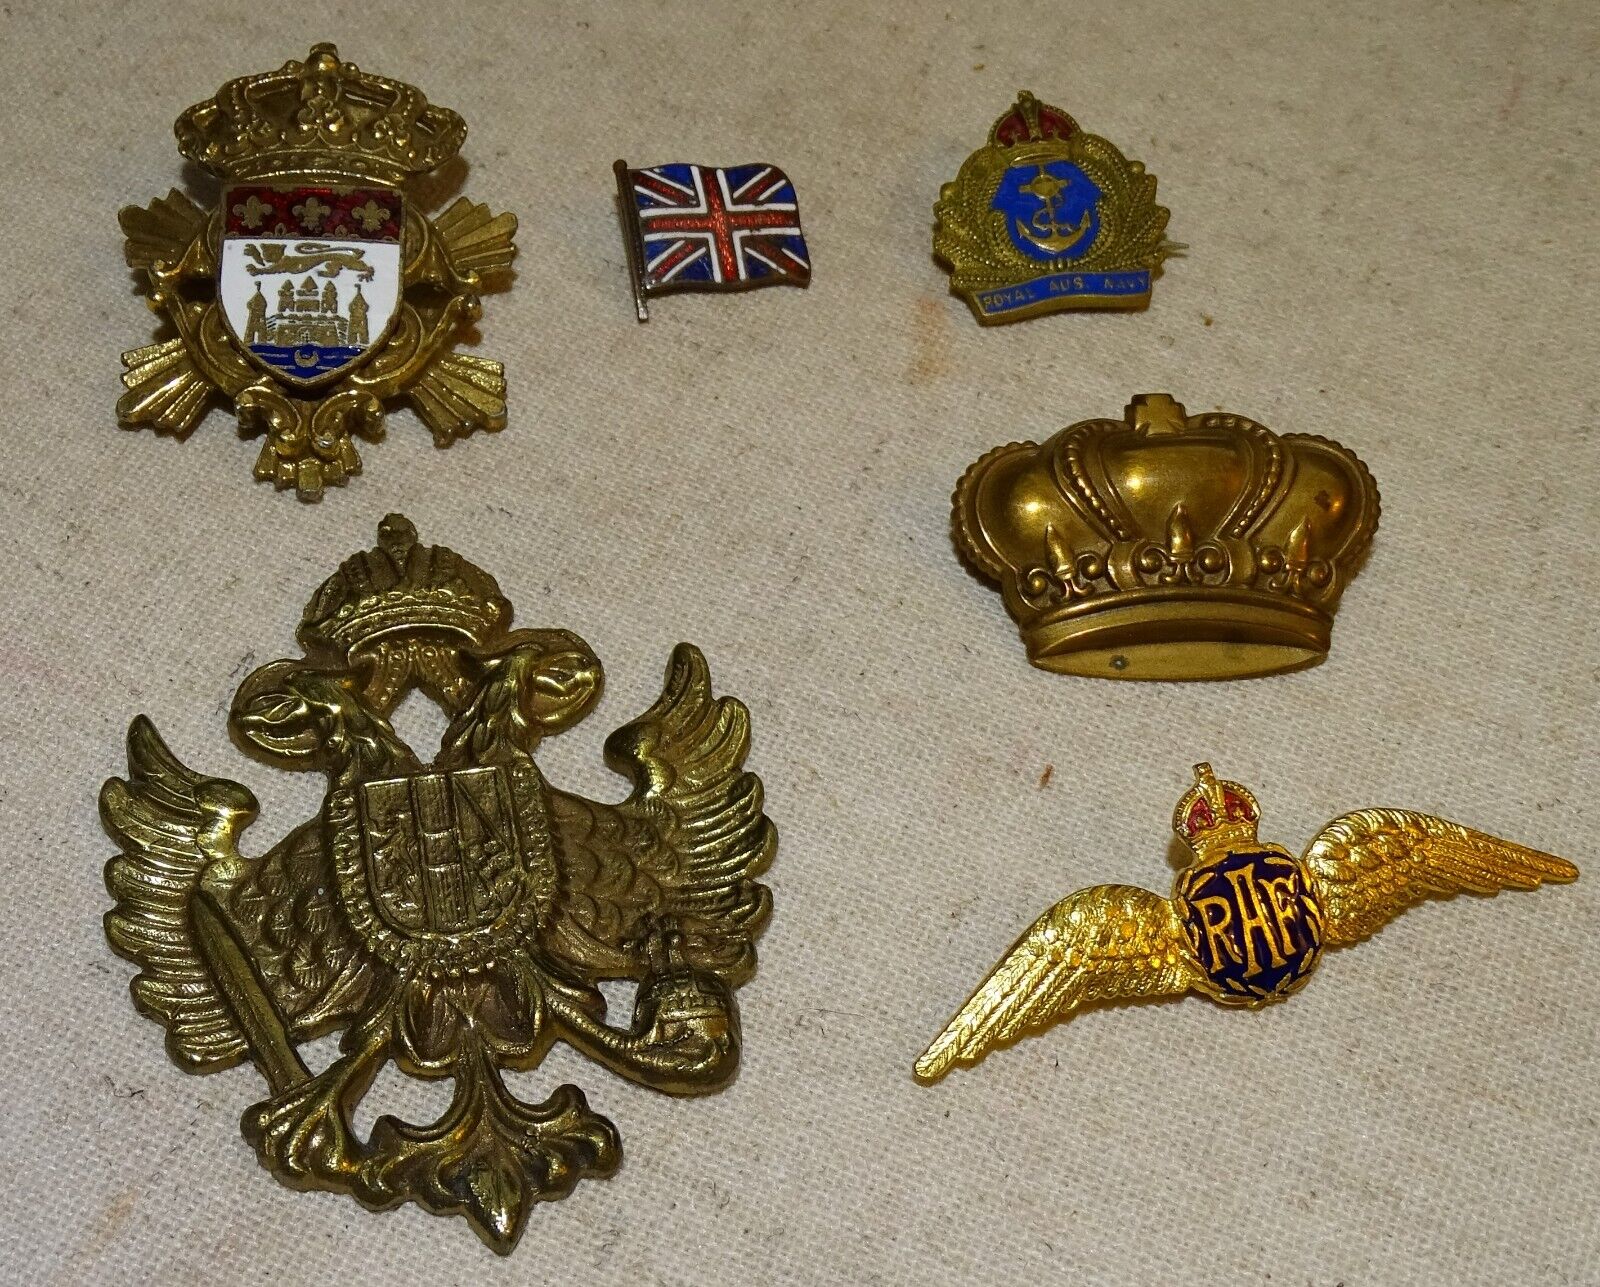 6 British WWII Era Pins, etc. from Estate Sale - Royal Air Force, Coro, etc.